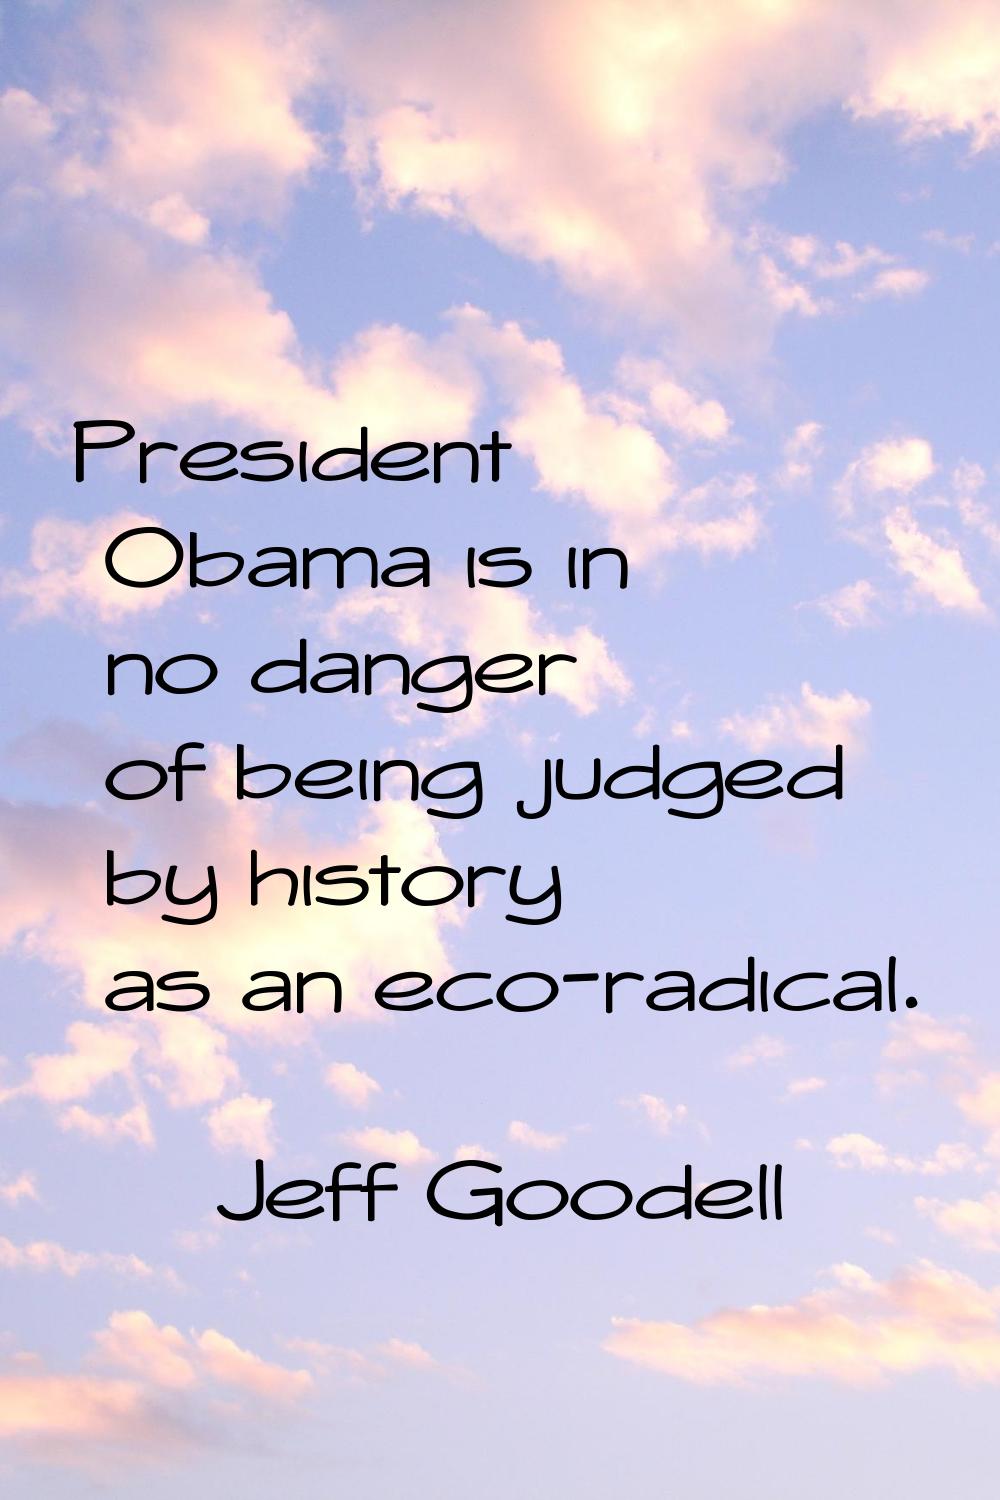 President Obama is in no danger of being judged by history as an eco-radical.